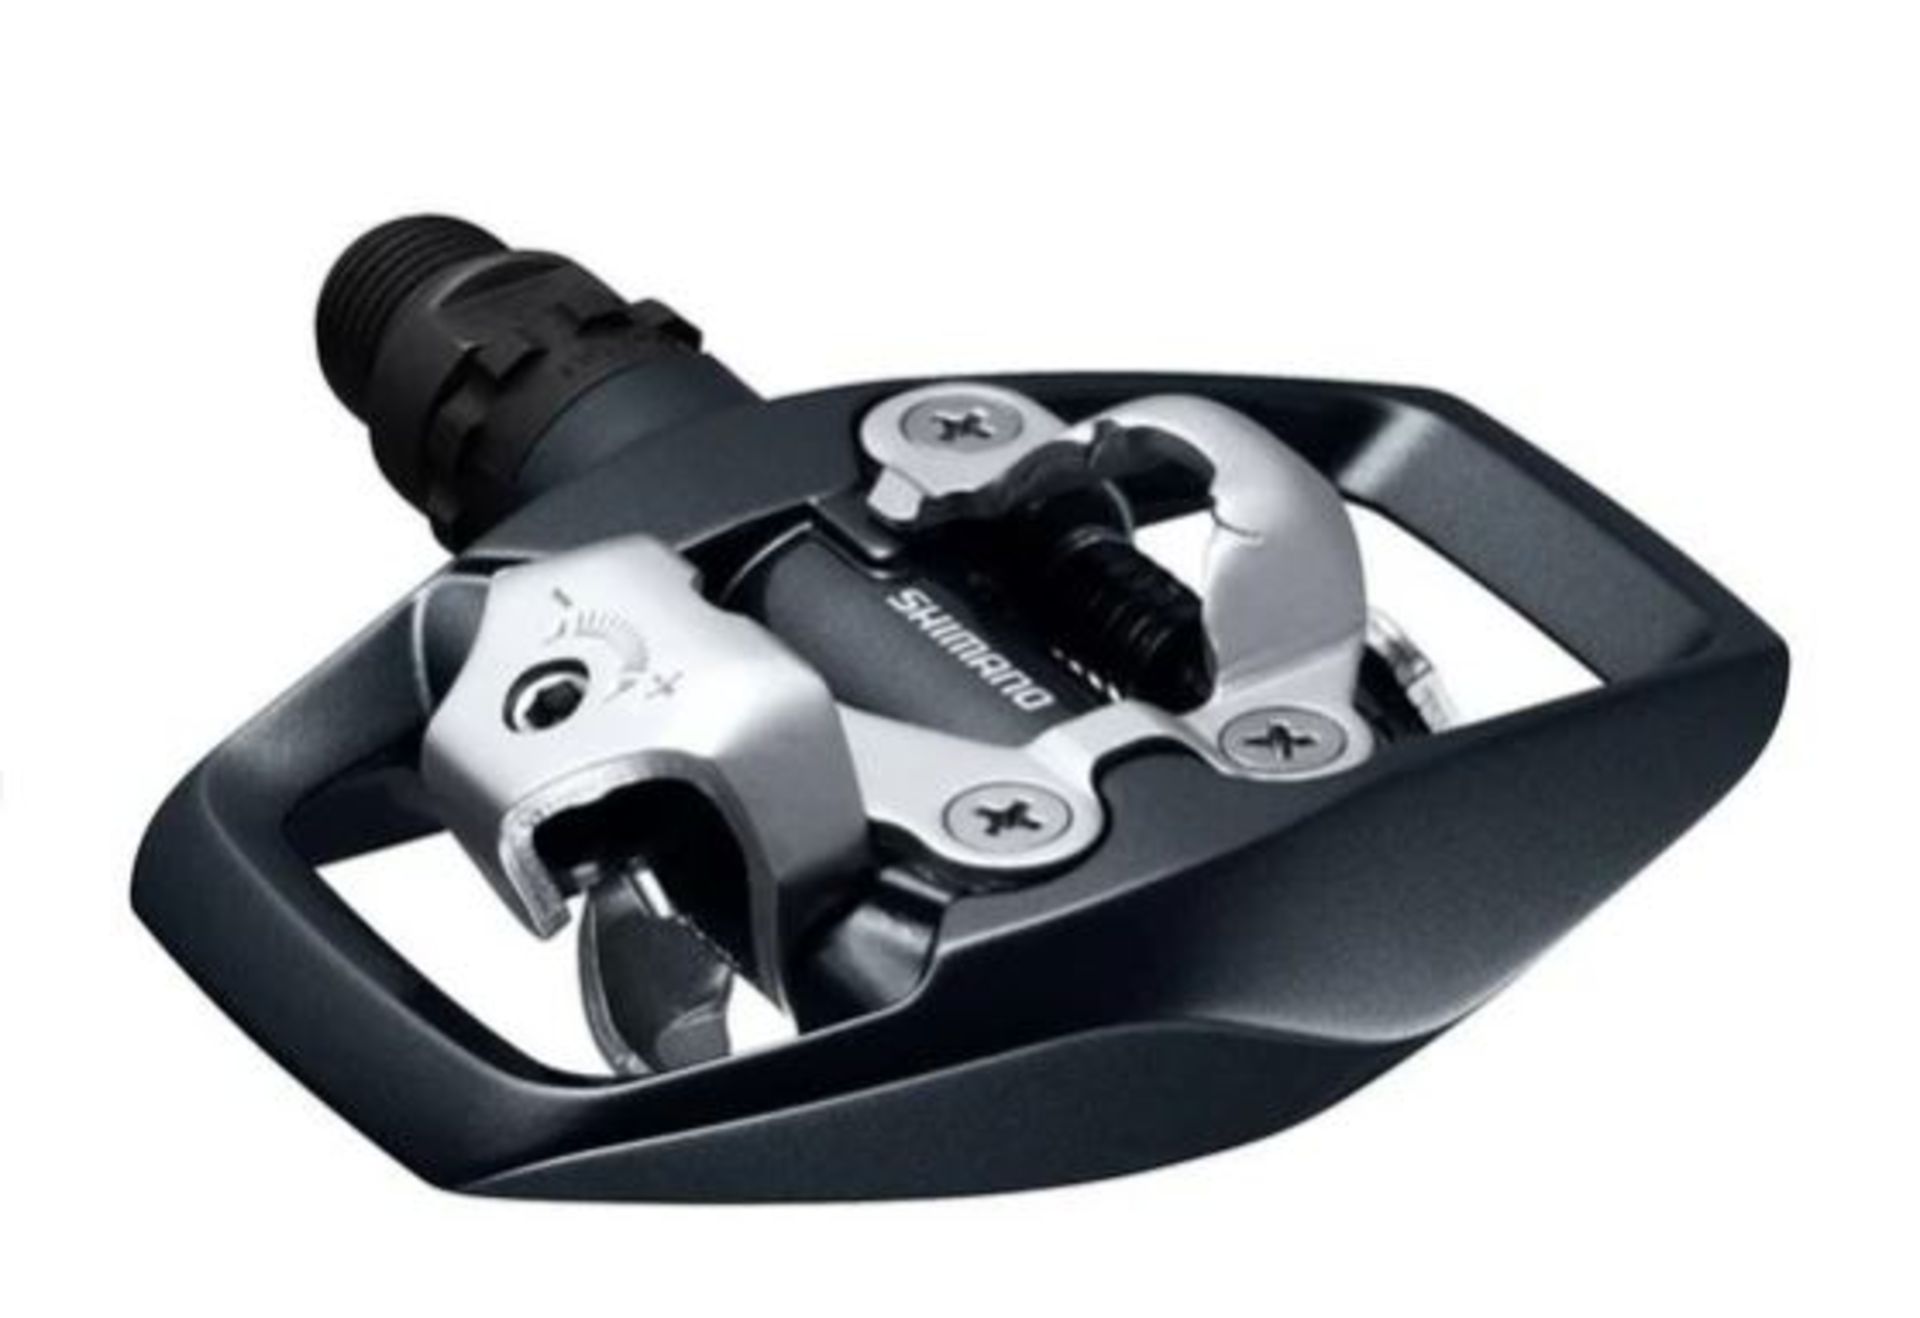 SHIMANO PD-ED500 Spd Road Pedals - Image 2 of 6